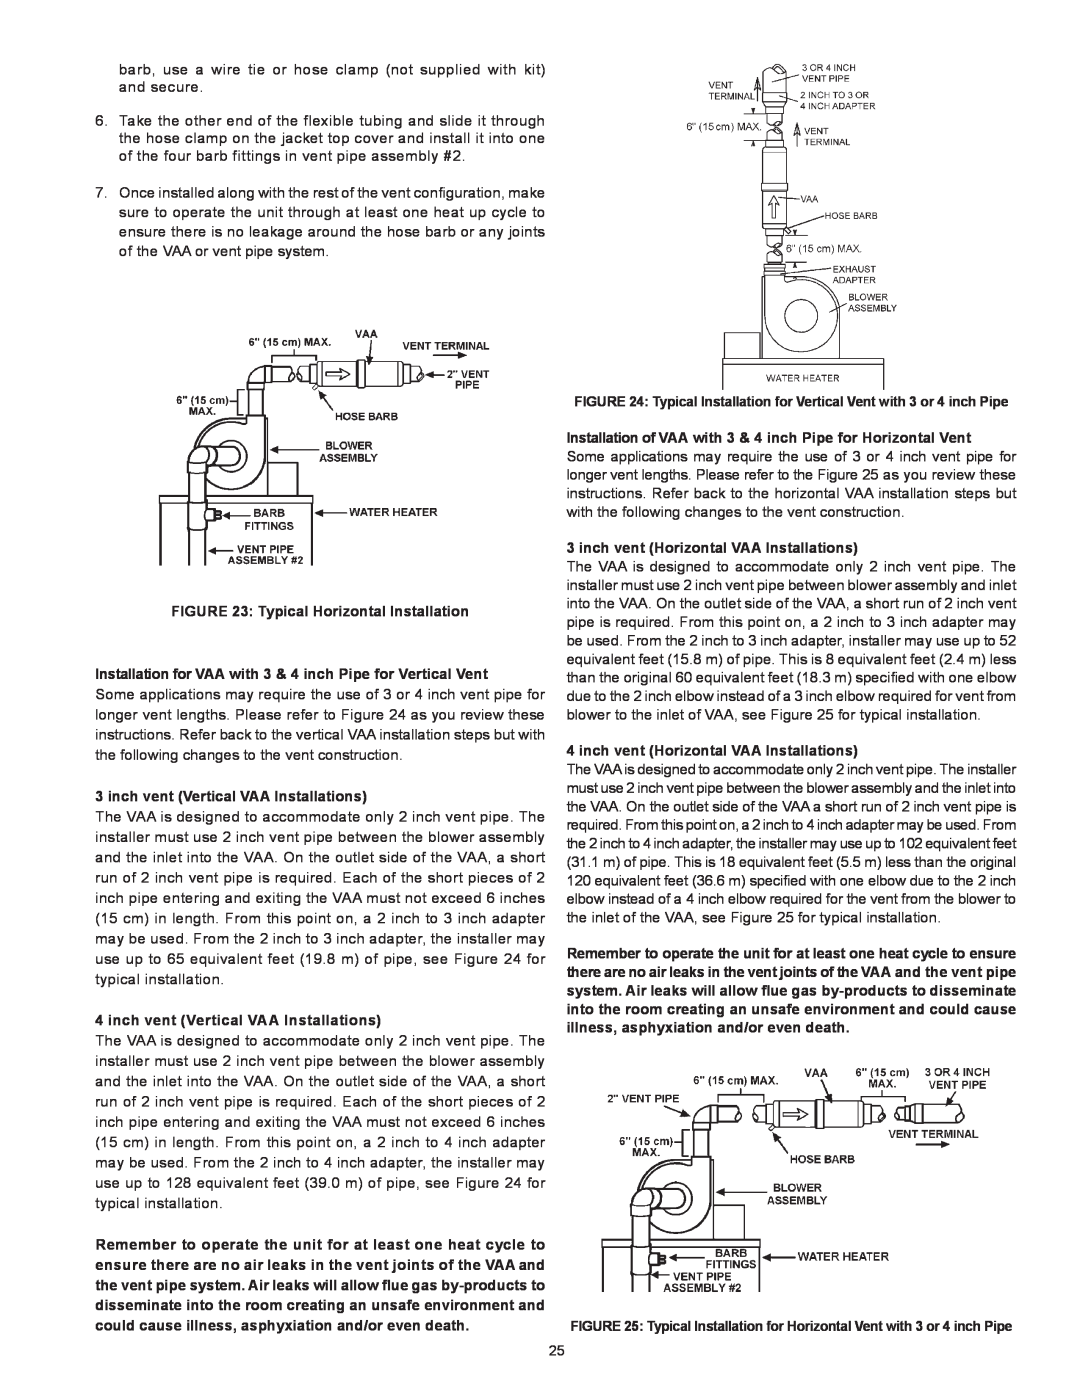 American Water Heater American Water Heaters Residential Gas Water Heater Typical Horizontal Installation 